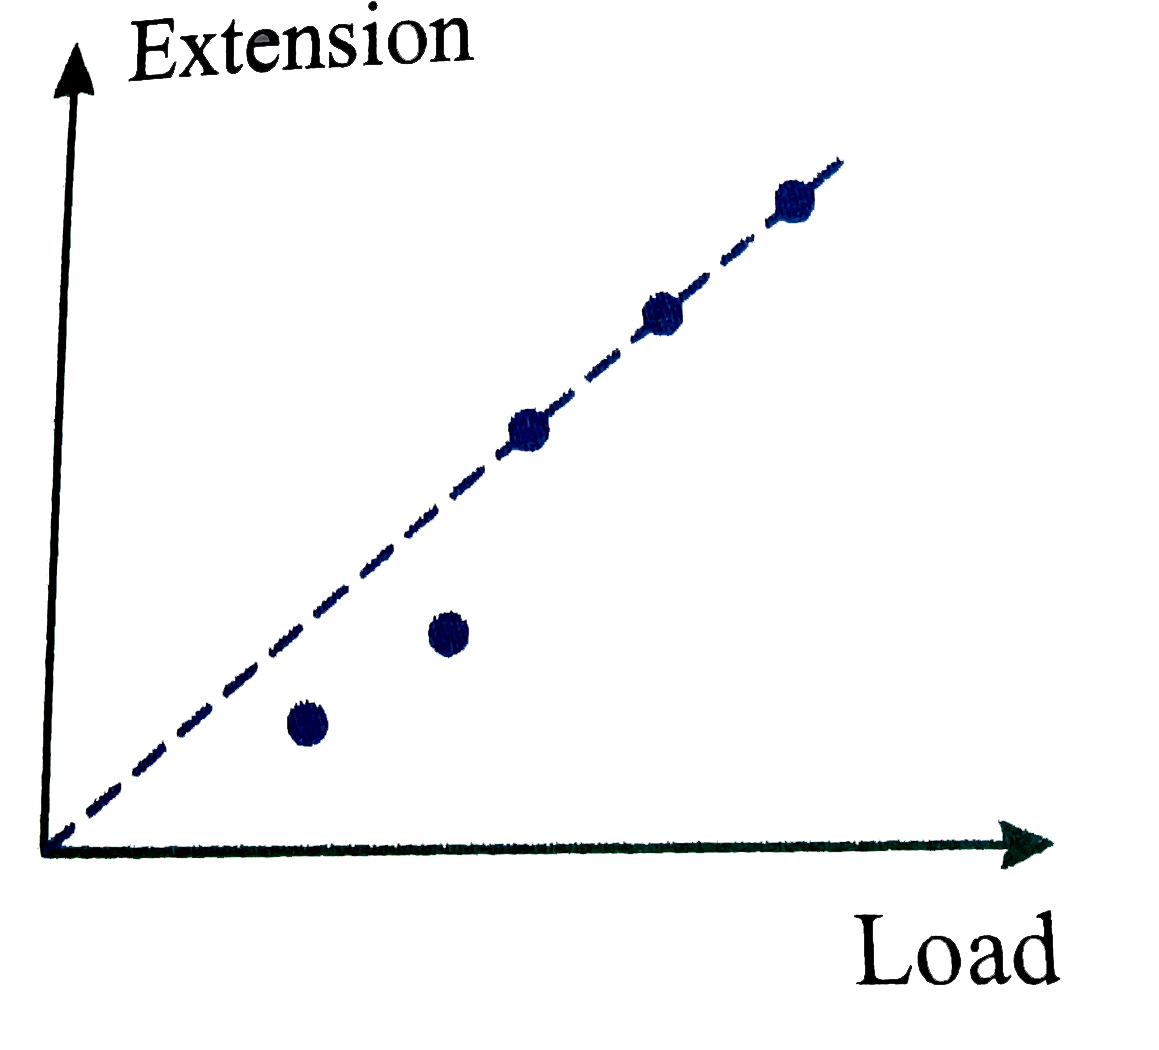 Statement-I: In Searle's experiment, extension versus load curve is drawn as shown. In the plot the first two readings are not lying on the straight line.       Statement-II : Experiment is performed incorrectly